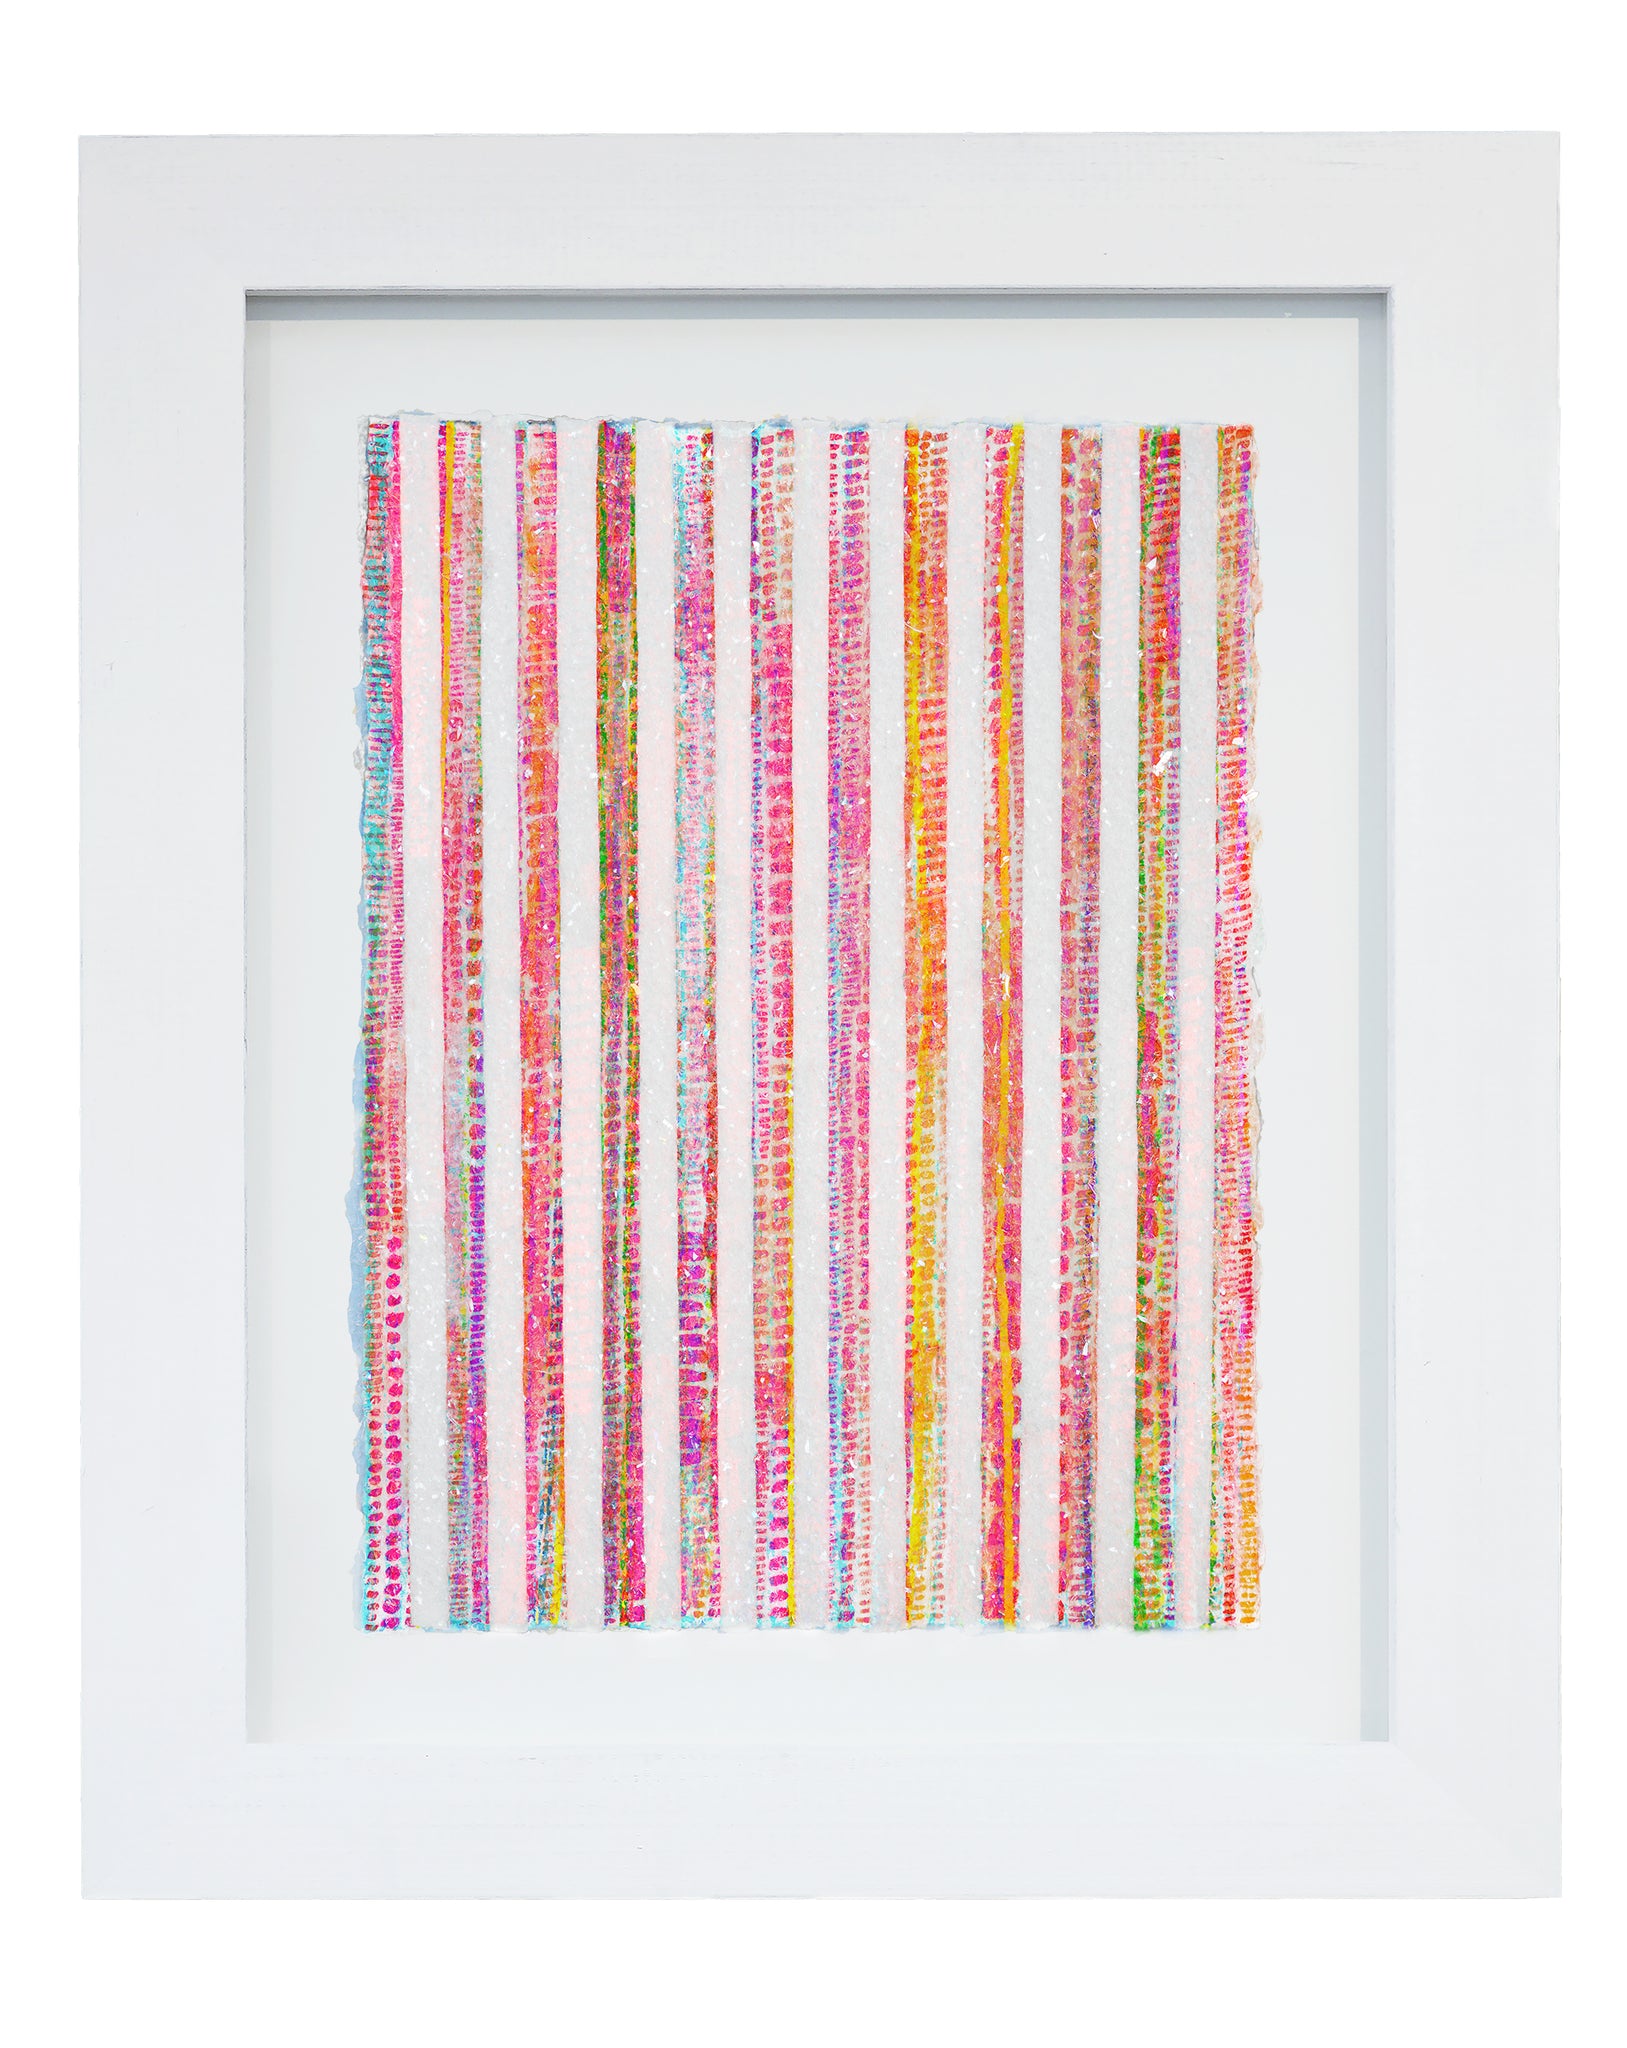 Lineation No. 109 -36" X 28" Framed